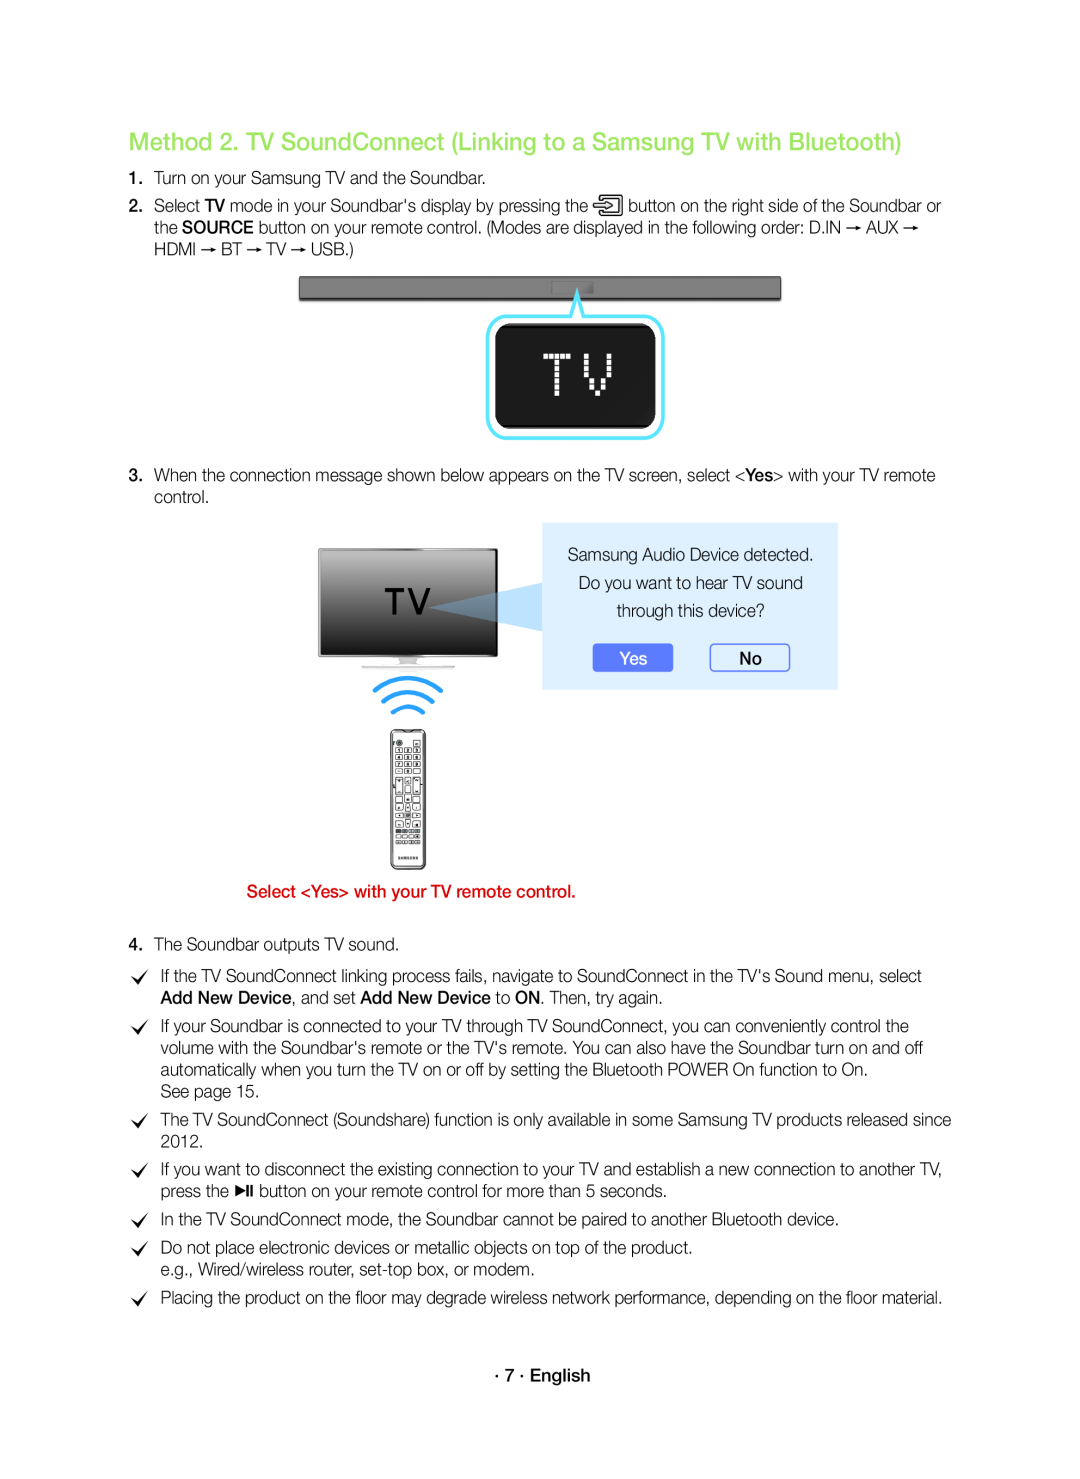 Method 2. TV SoundConnect (Linking to a Samsung TV with Bluetooth) Standard HW-K550